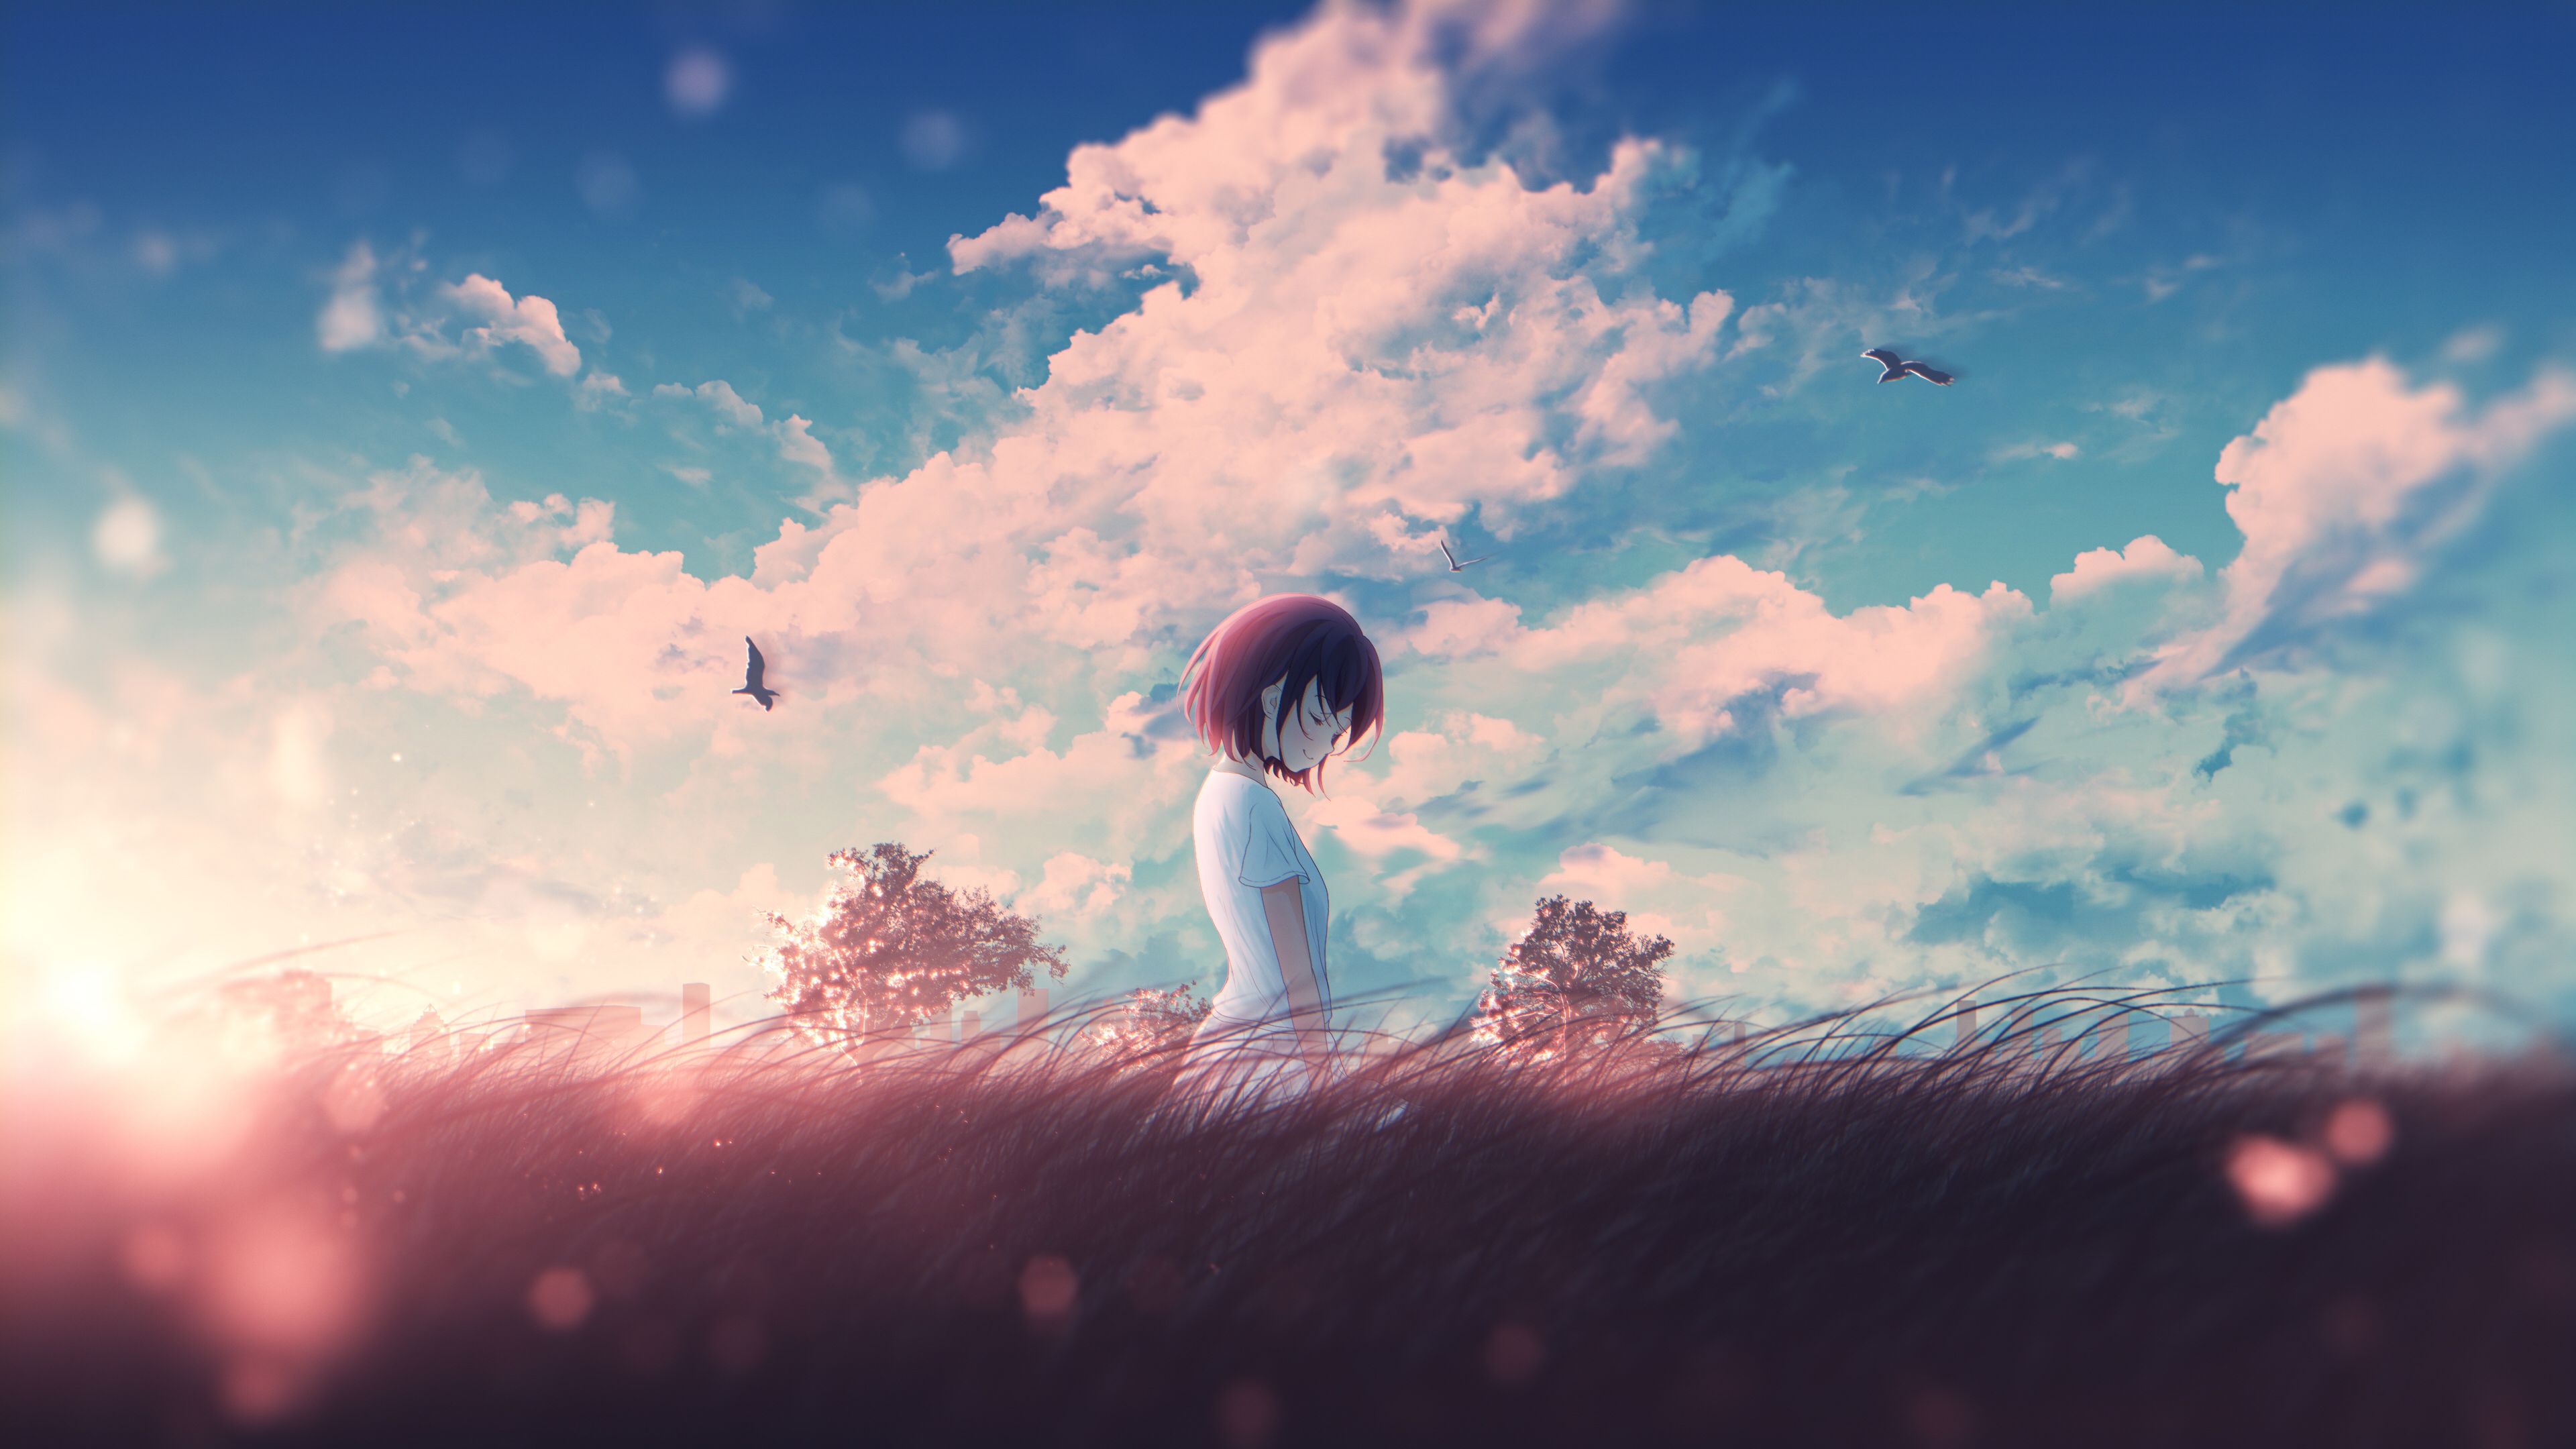 Download Calm Anime Boy Collecting Books Wallpaper | Wallpapers.com